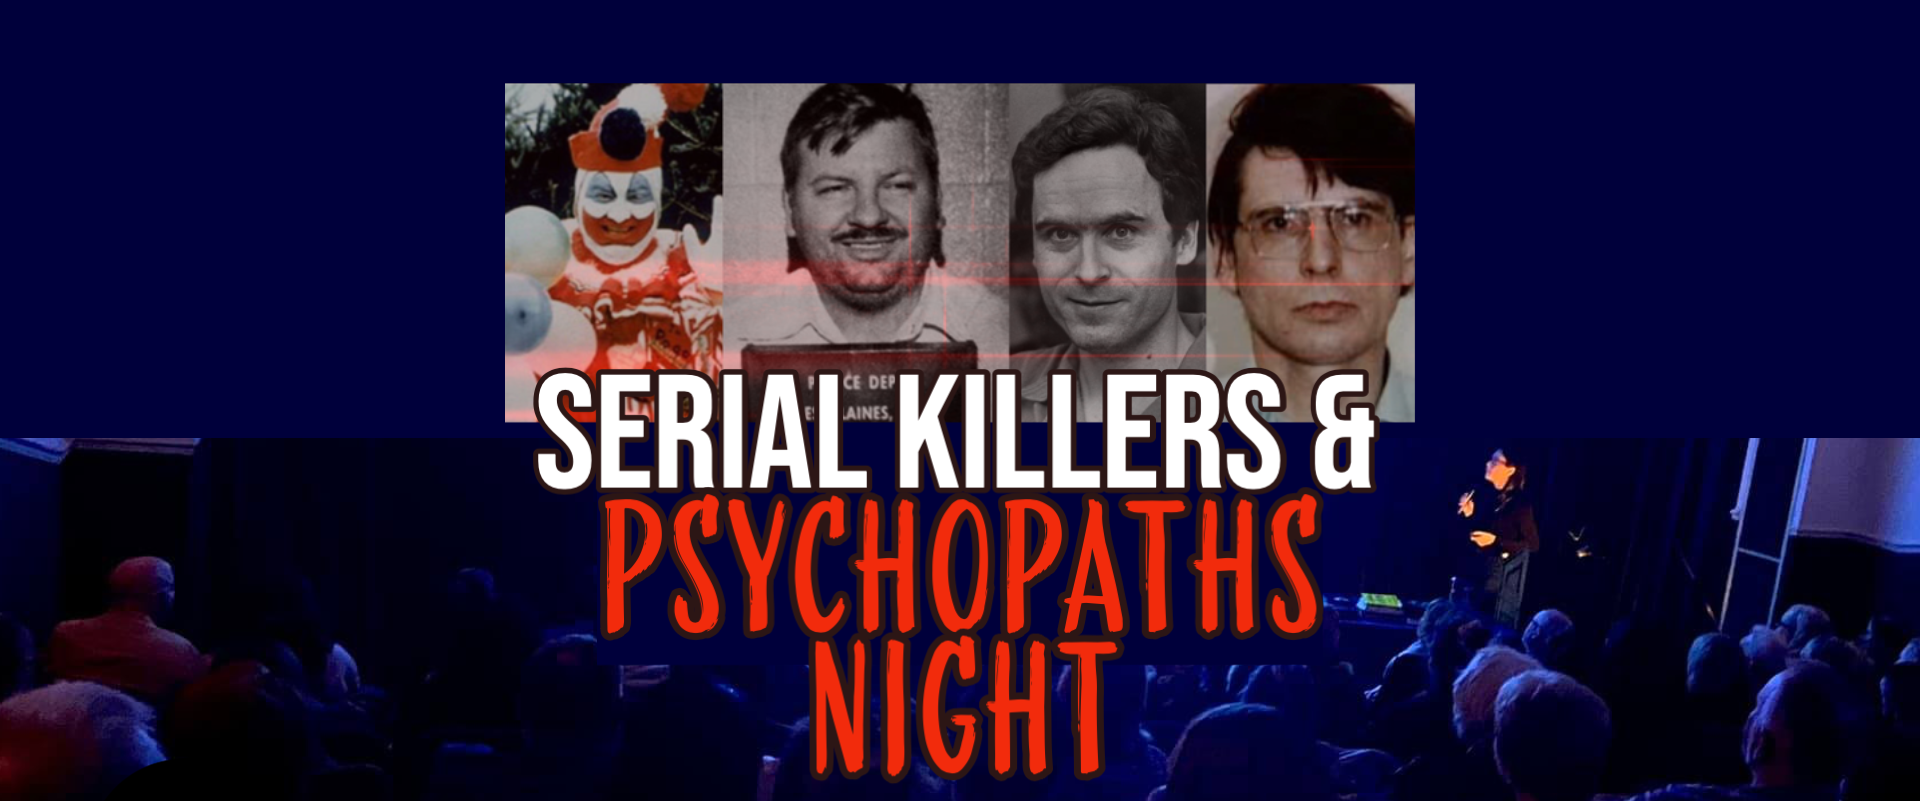 Serial Killers and Psychopaths Night